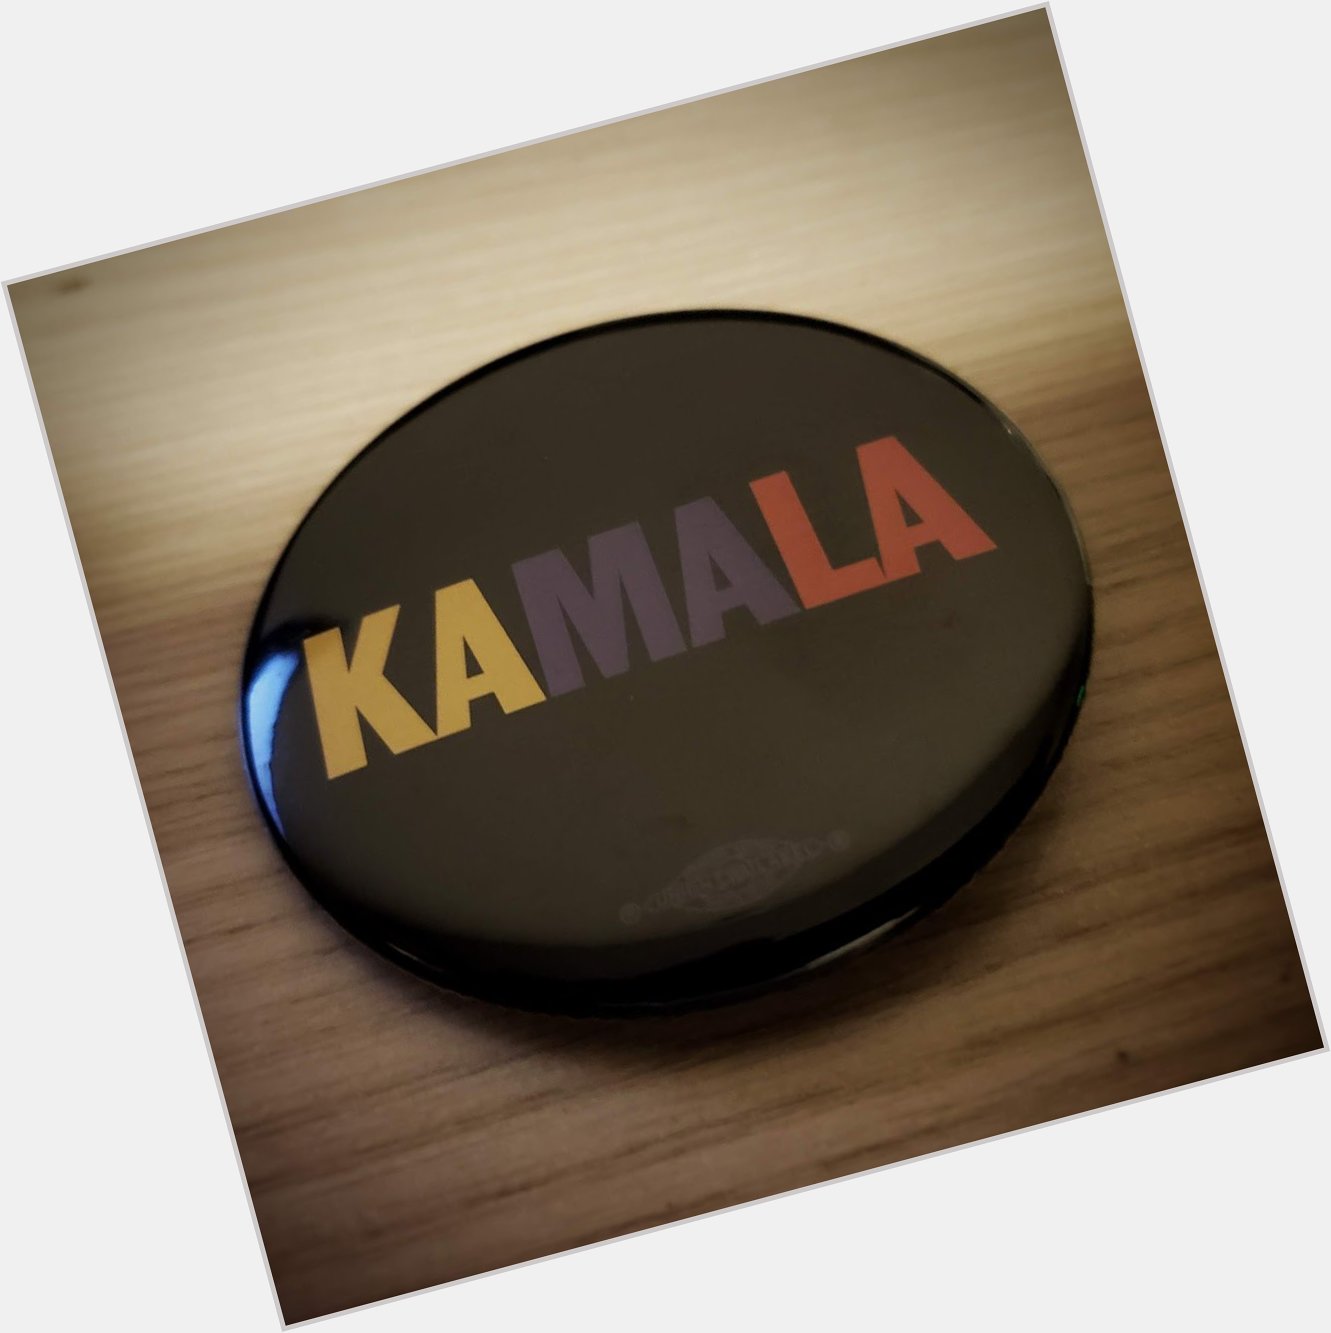 Happy Birthday to Kamala Harris.
Pictured Below is a 2020 campaign button. 